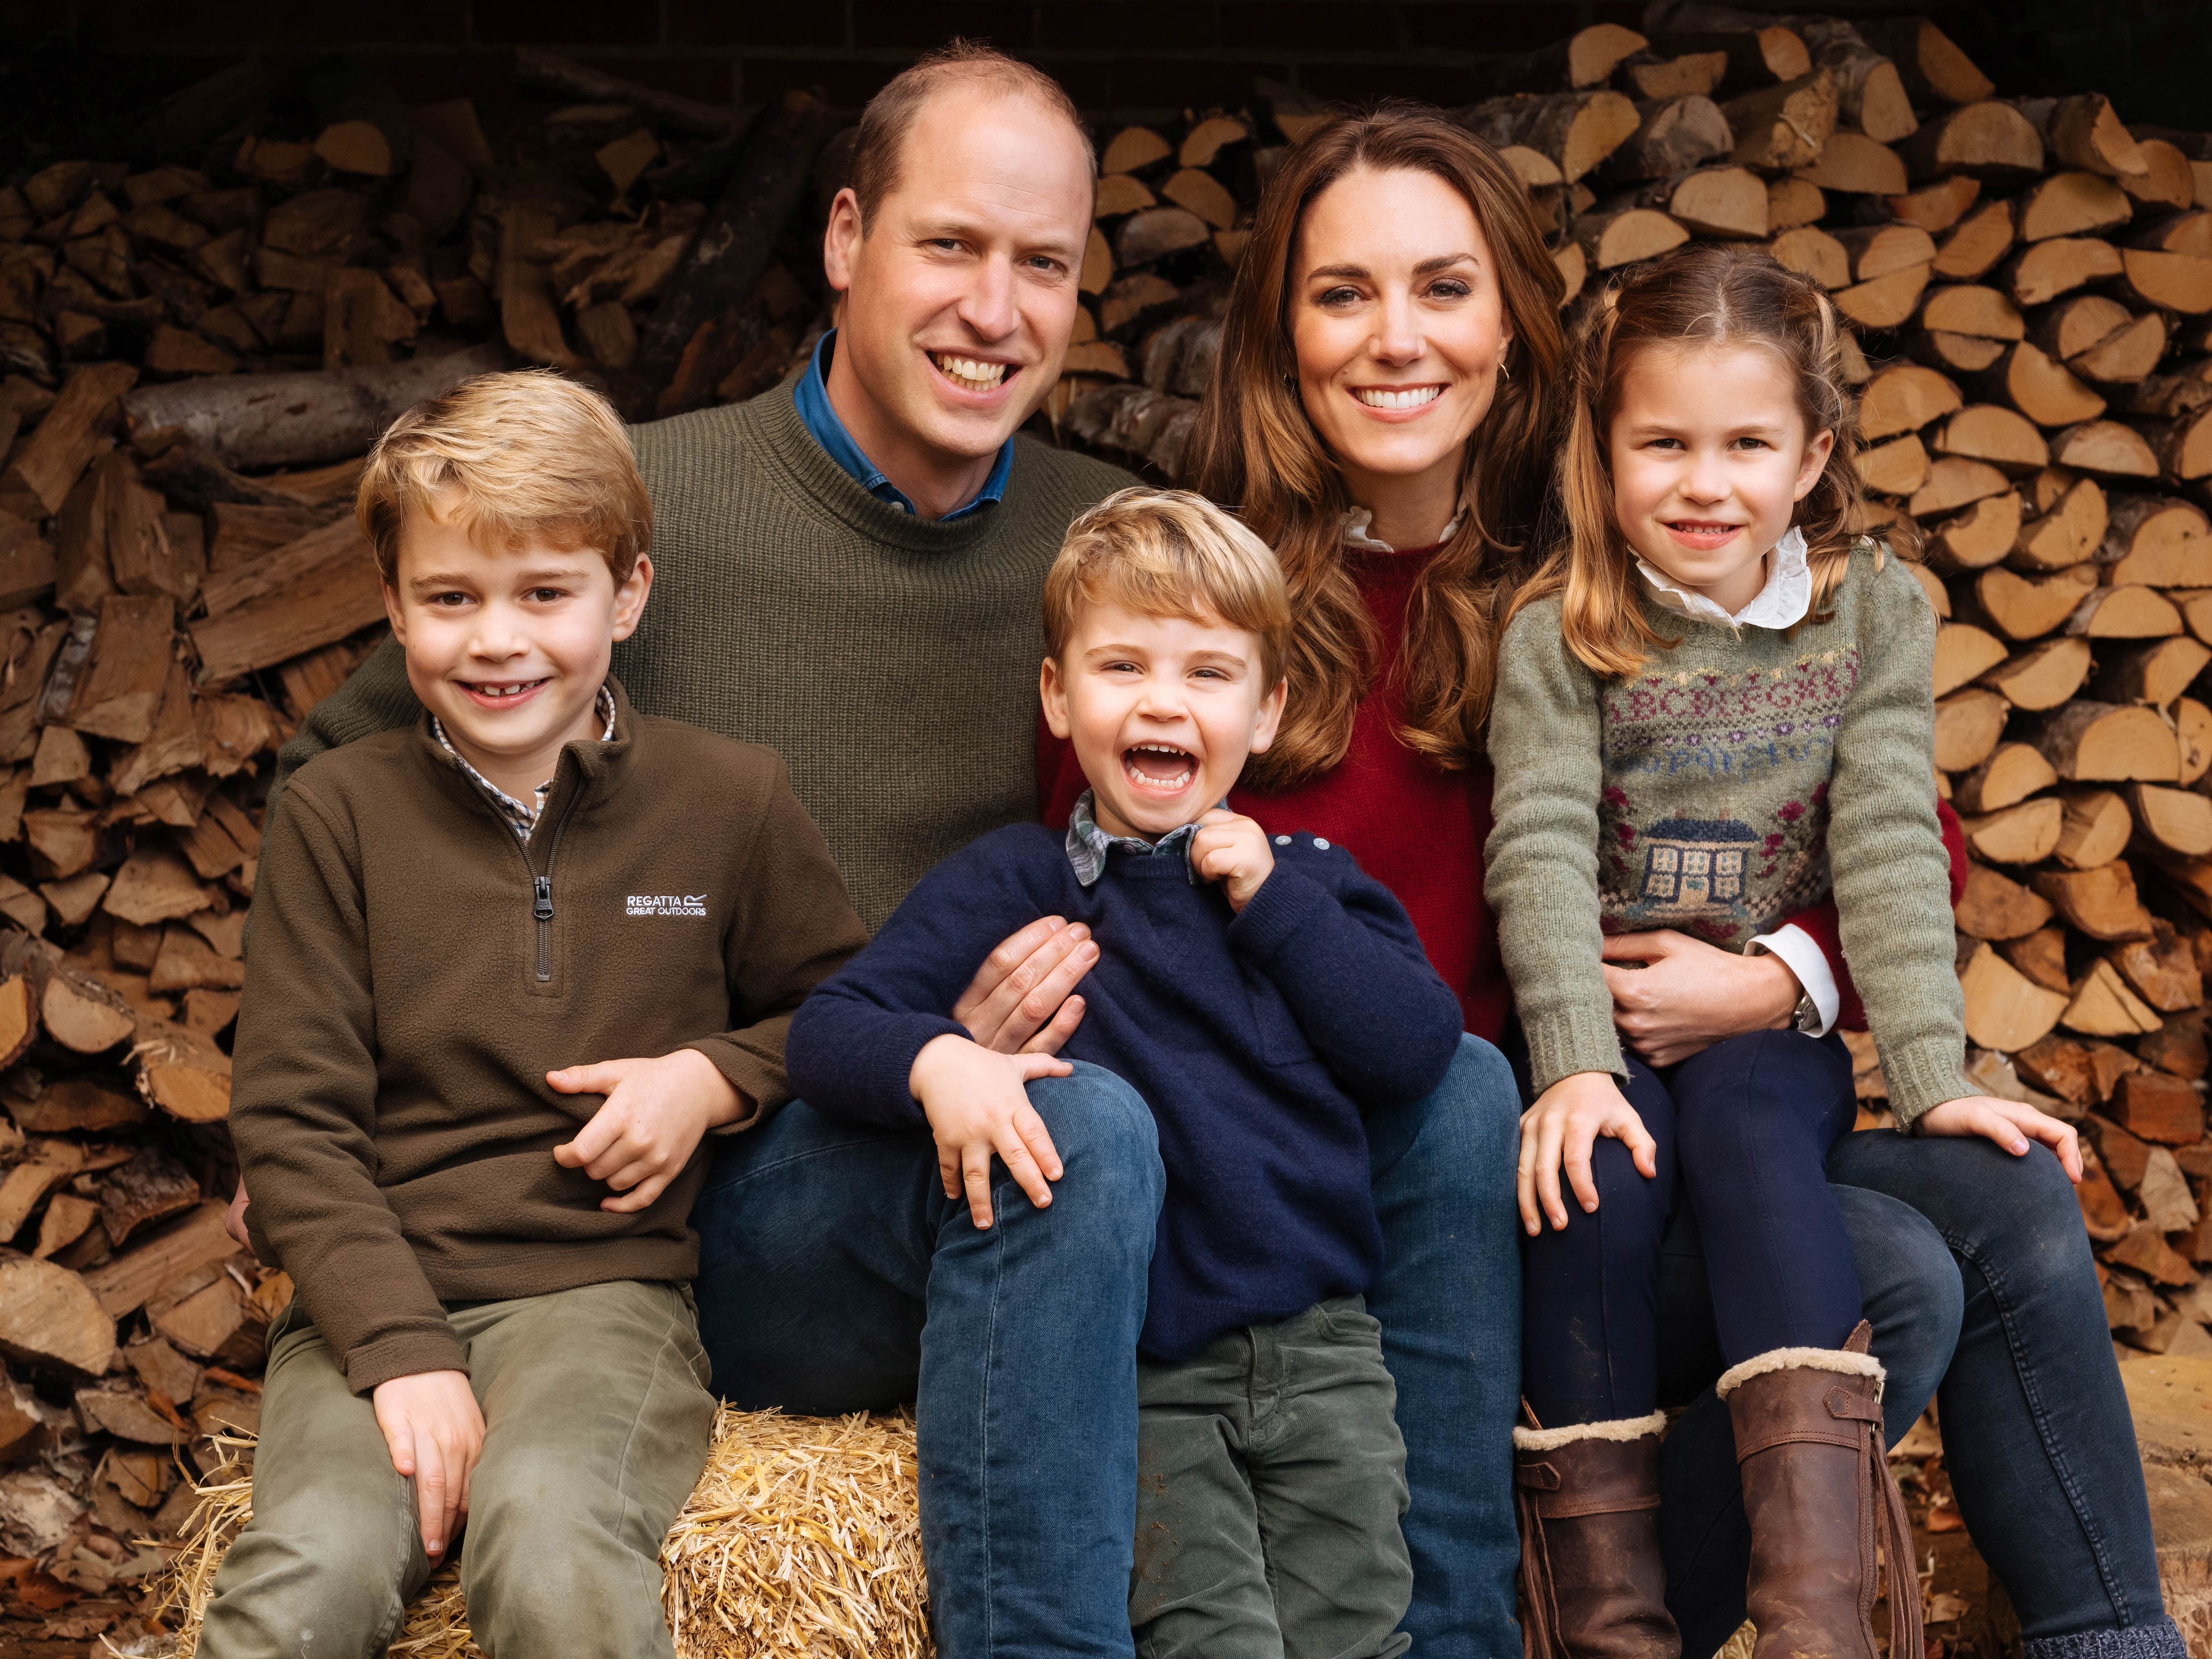 Prince William and Kate Middleton with their three children Prince George, Princess Charlotte and Prince Louis at Anmer Hall on December 16, 2020 | Photo: Getty Images